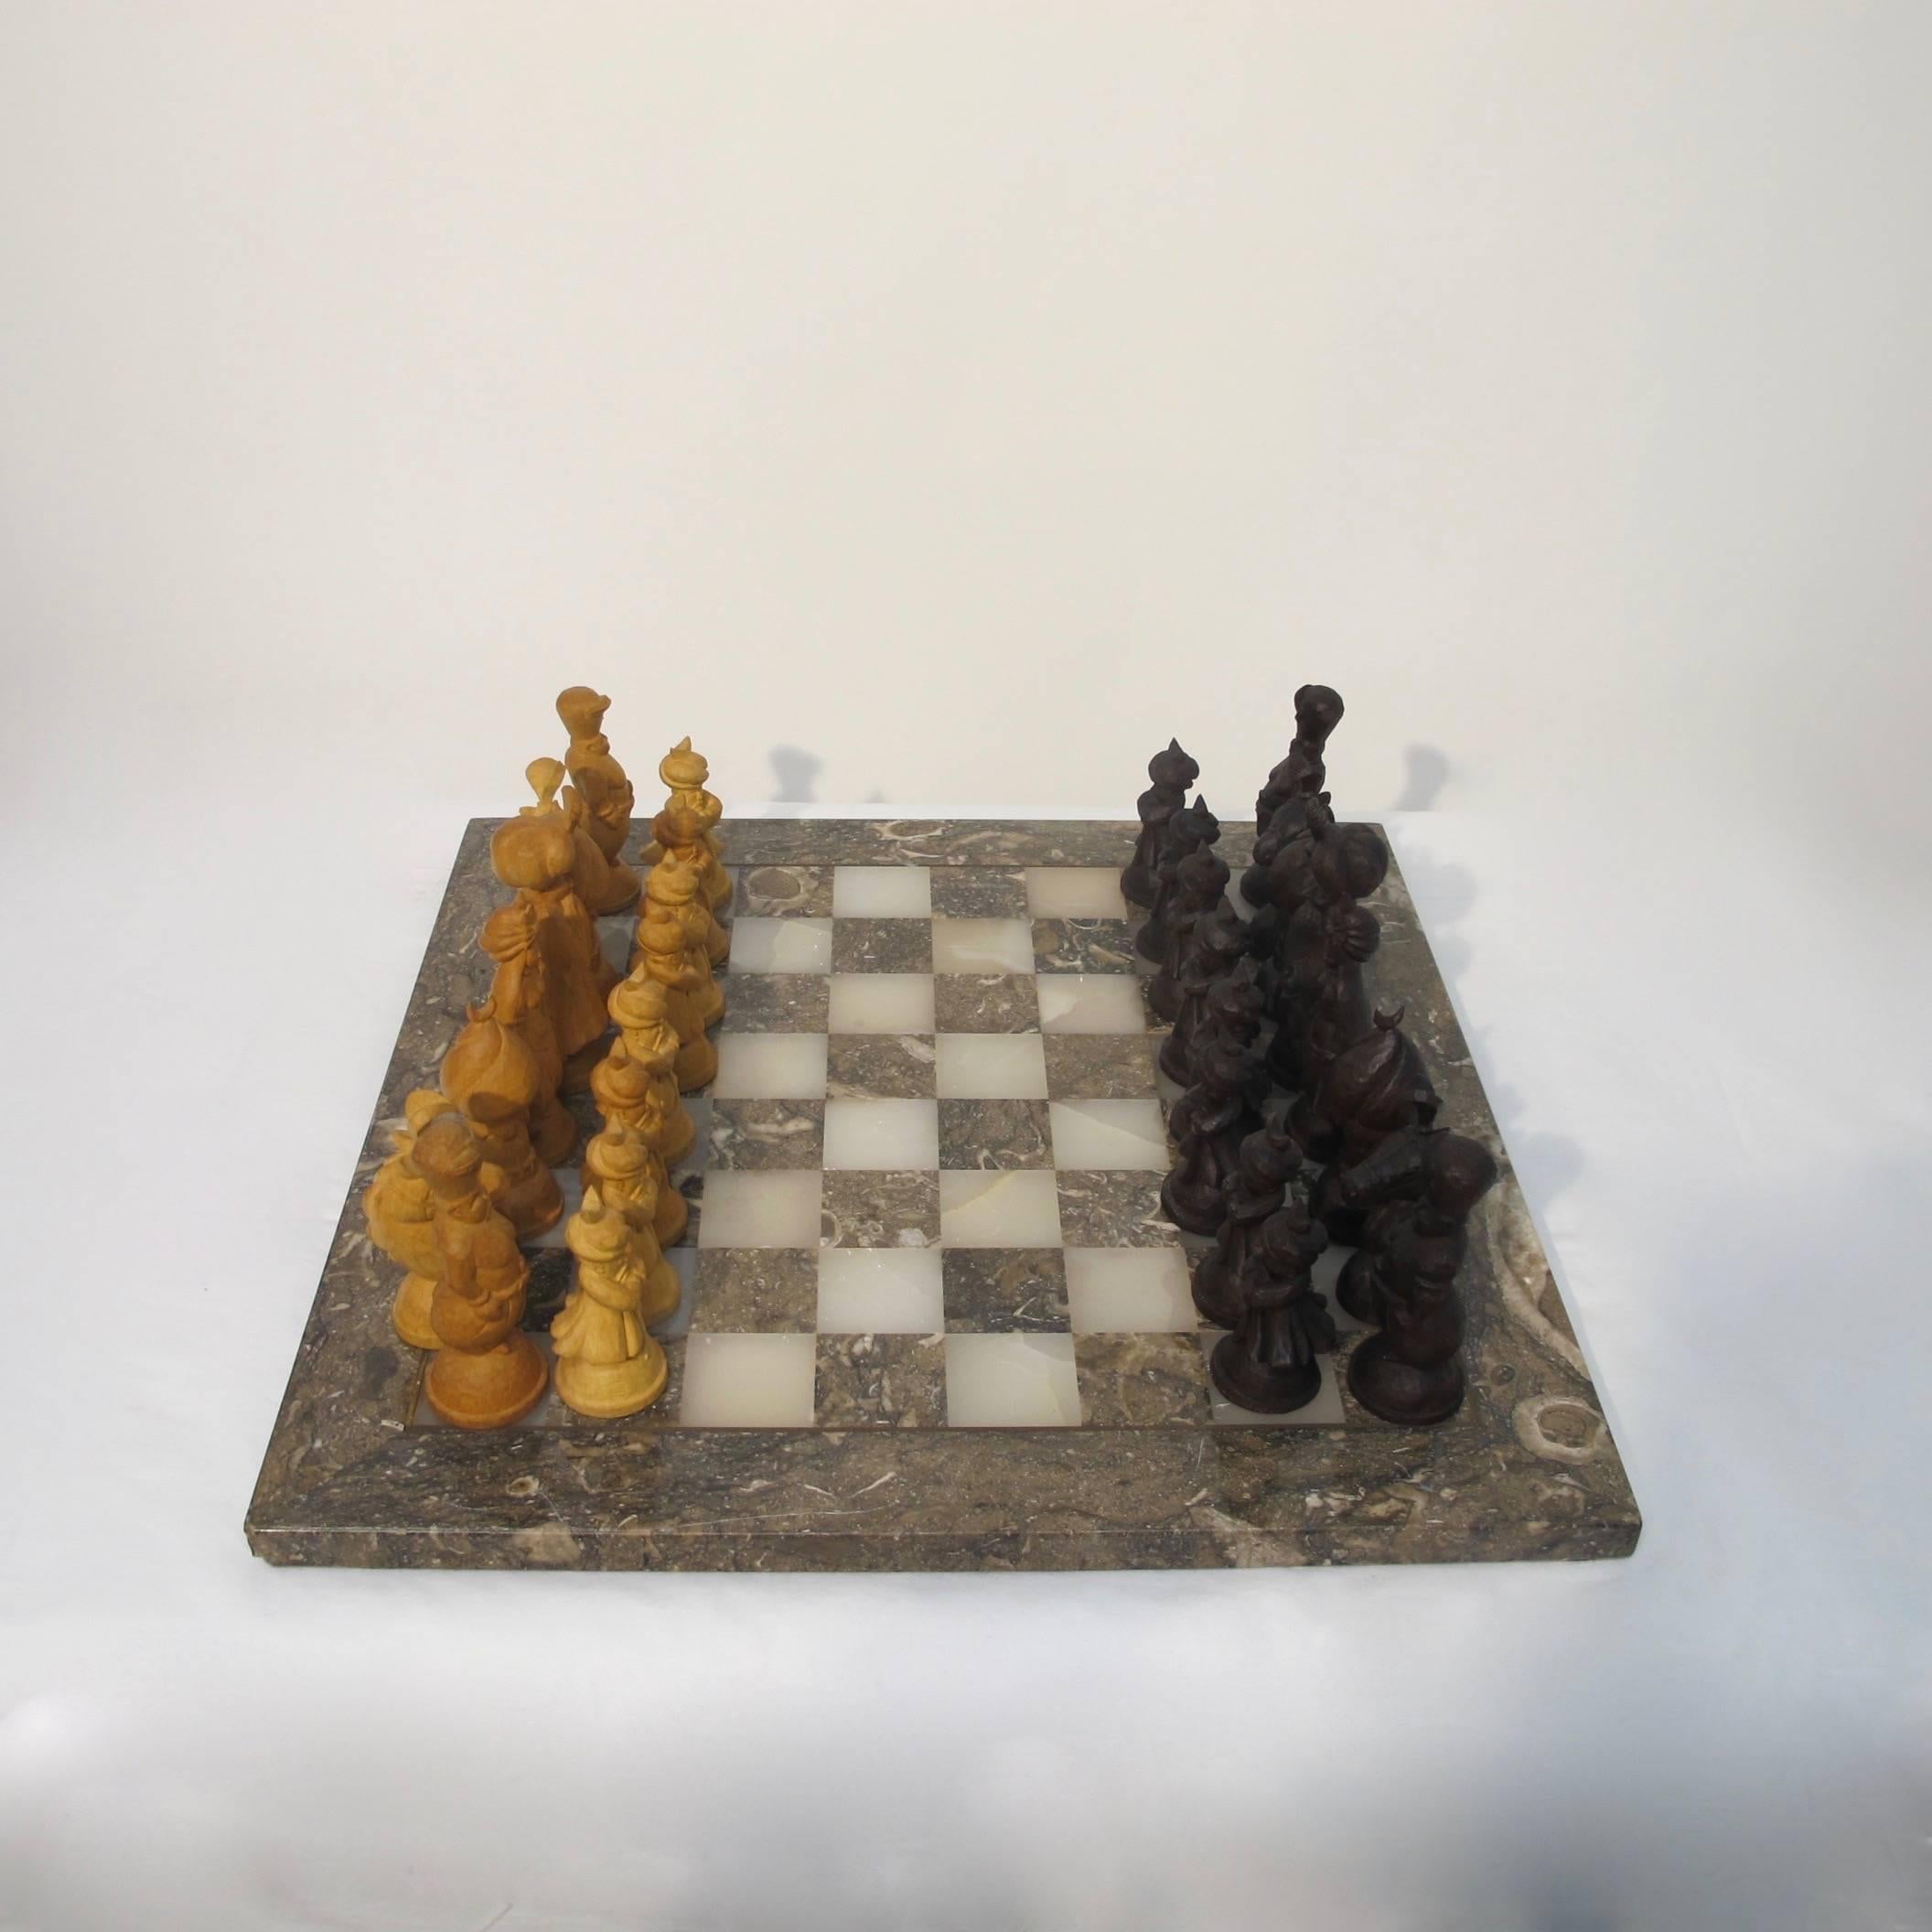 A beautifully fossilized marble and onyx chess board with inlaid brass detail, all hand-carved ottoman figures (the tallest measuring 5 inches high). Inlay box with fitted interior to house chess pieces. Game board measures 18